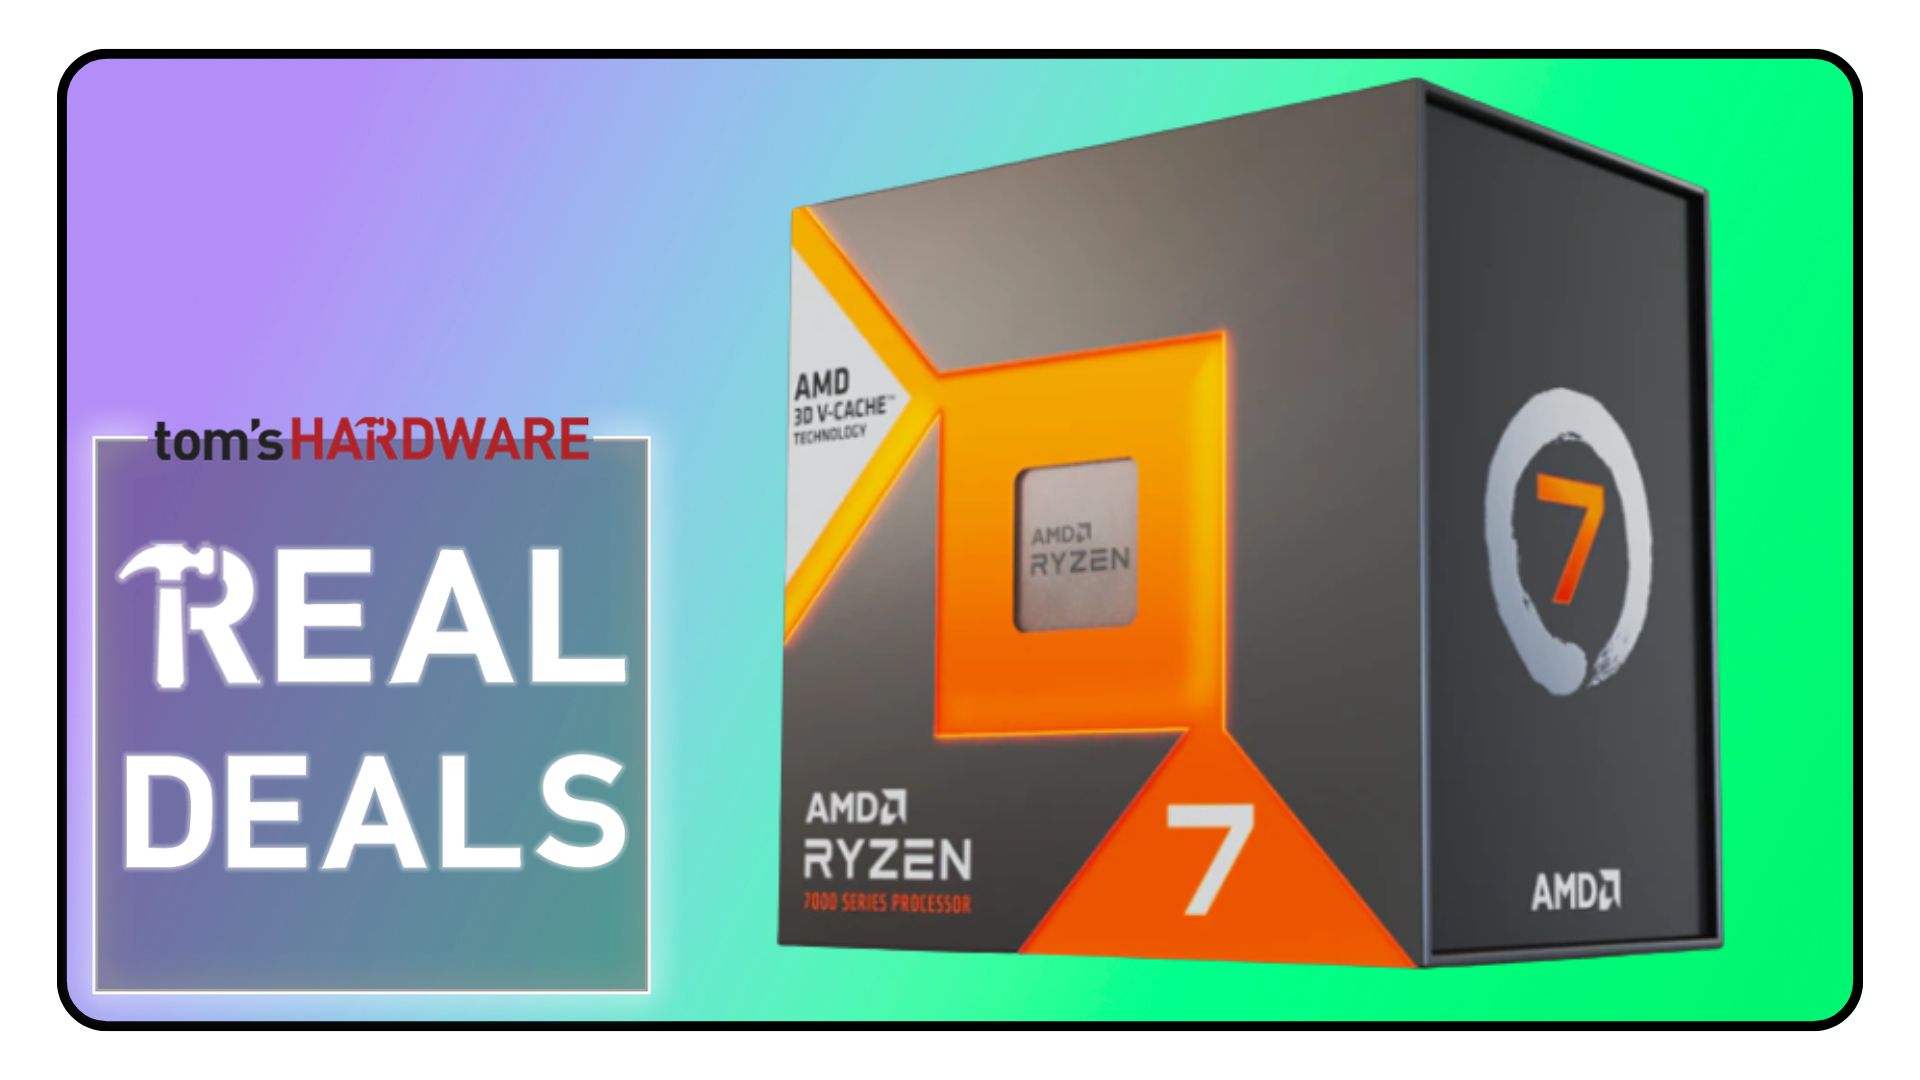 The best CPU for gaming is on an incredible sale — Ryzen 7 7800X3D is only $358